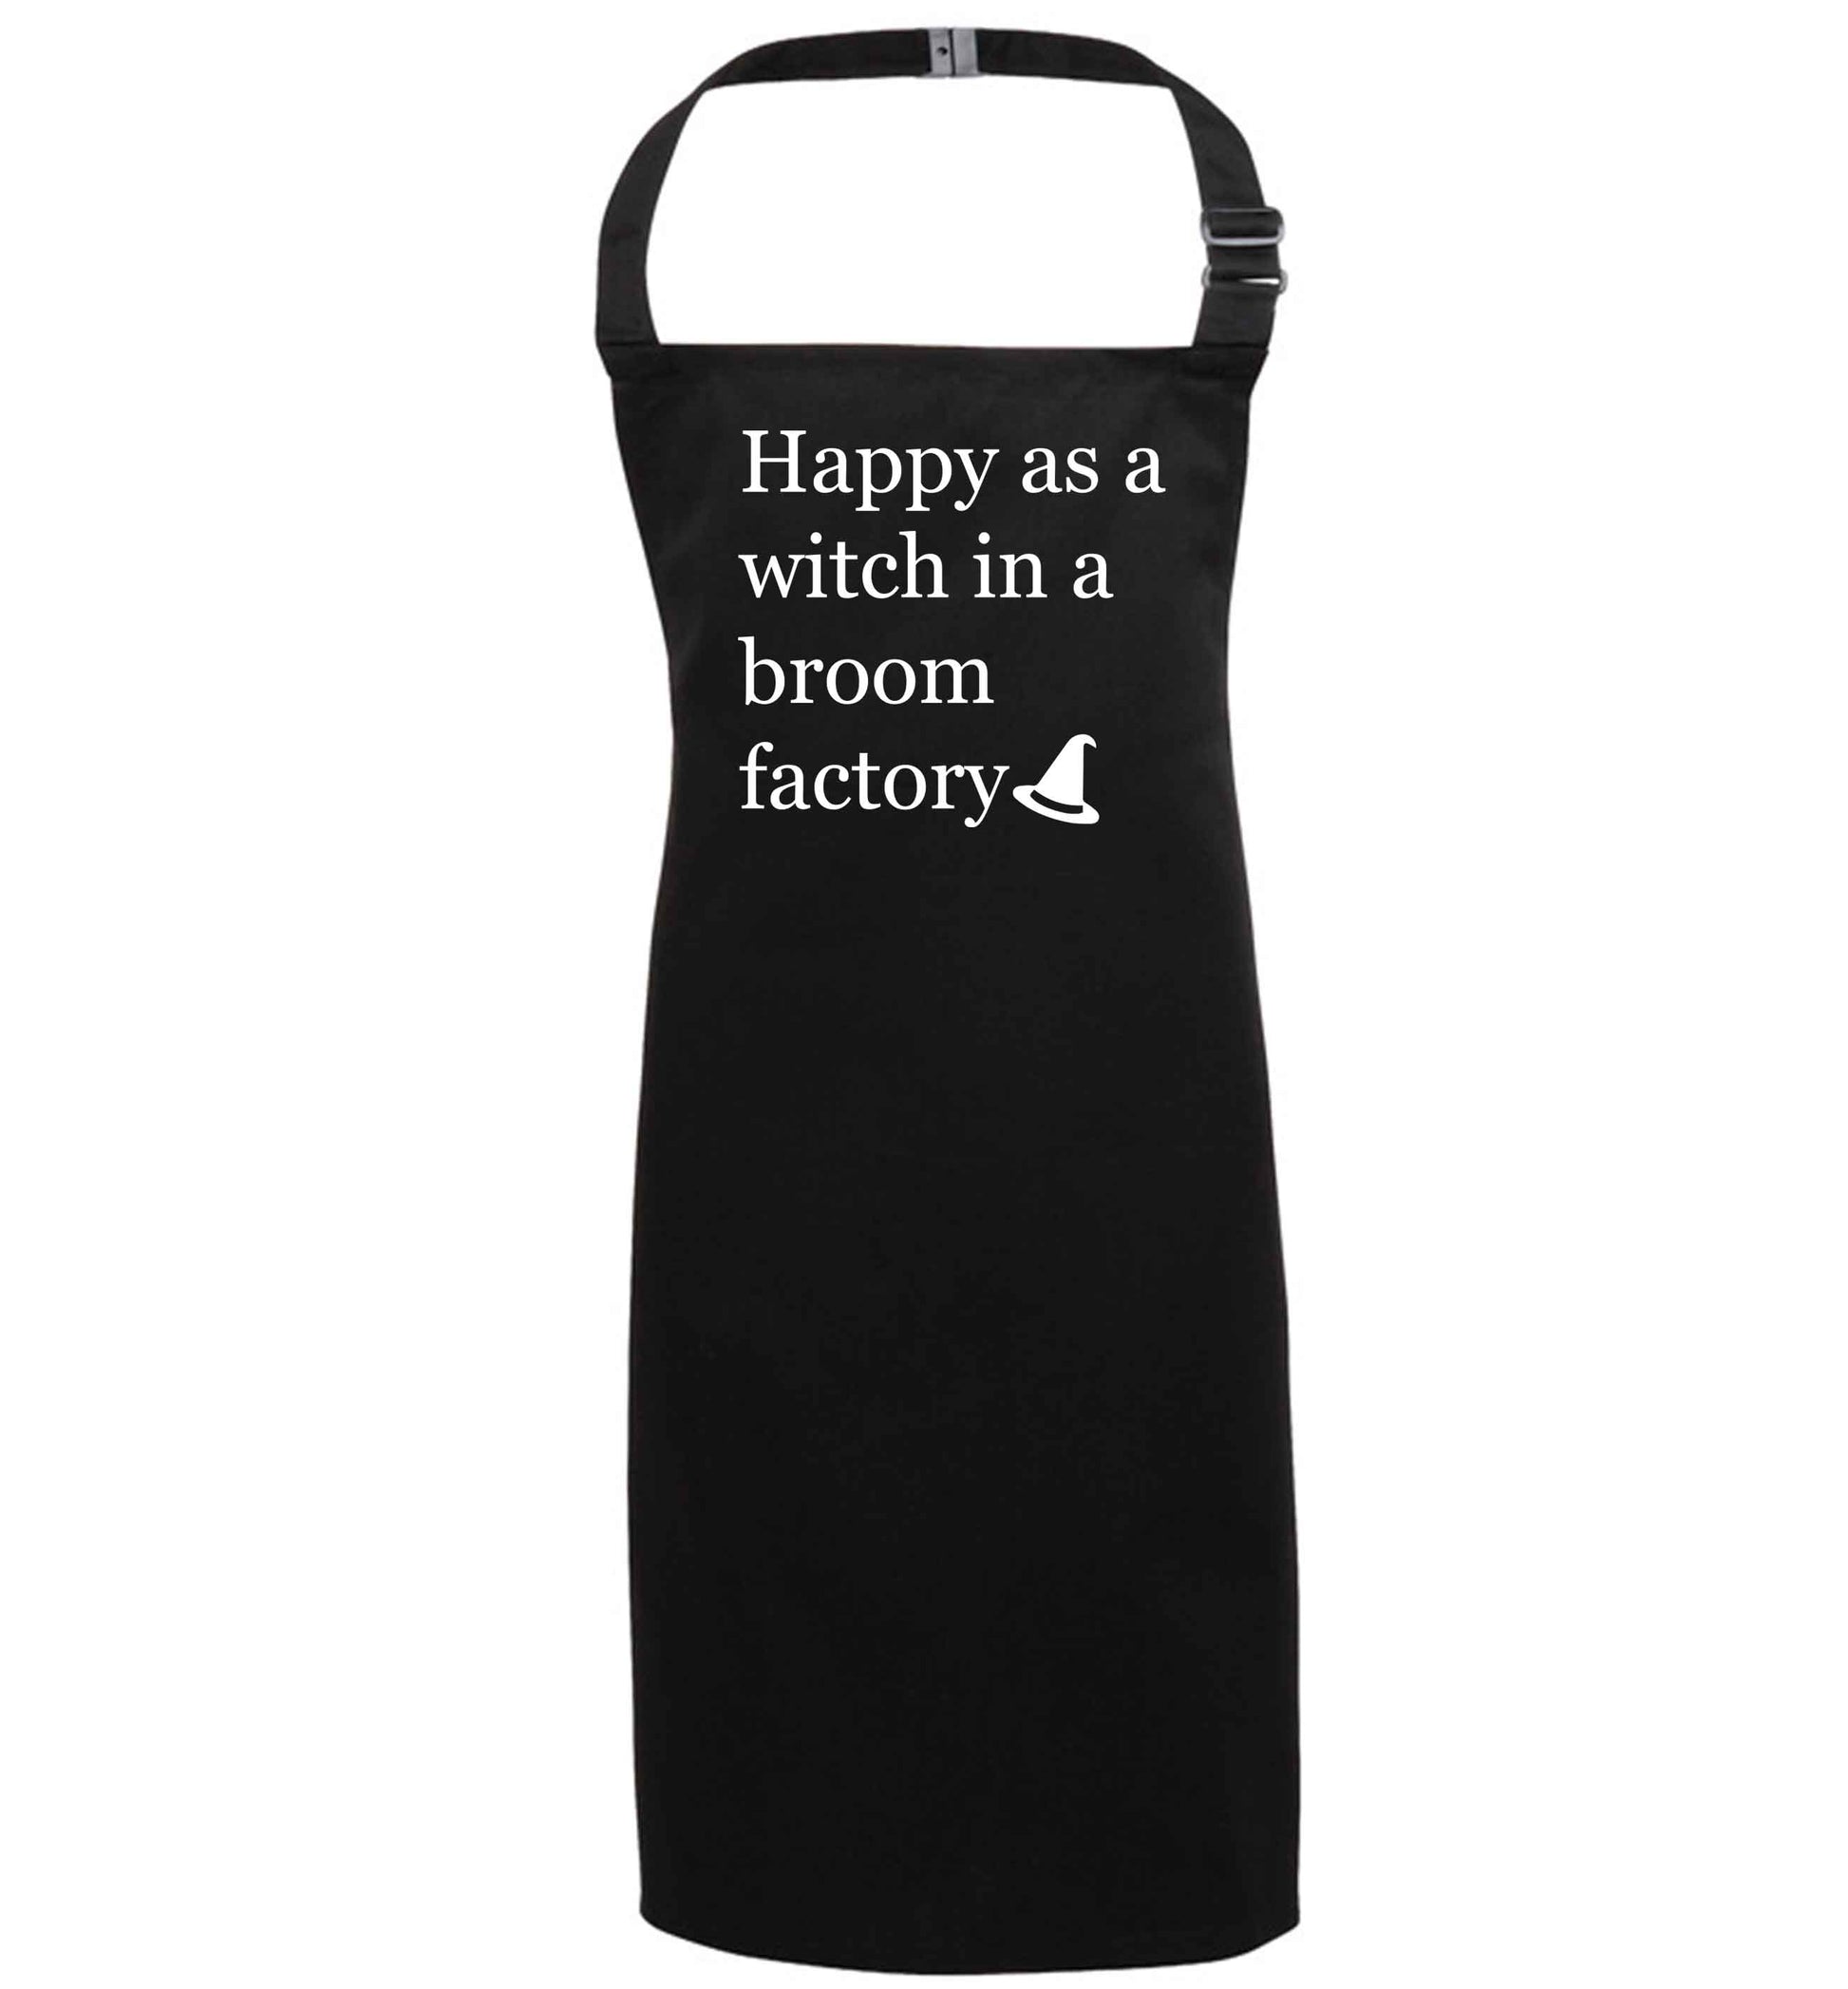 Happy as a witch in a broom factory black apron 7-10 years